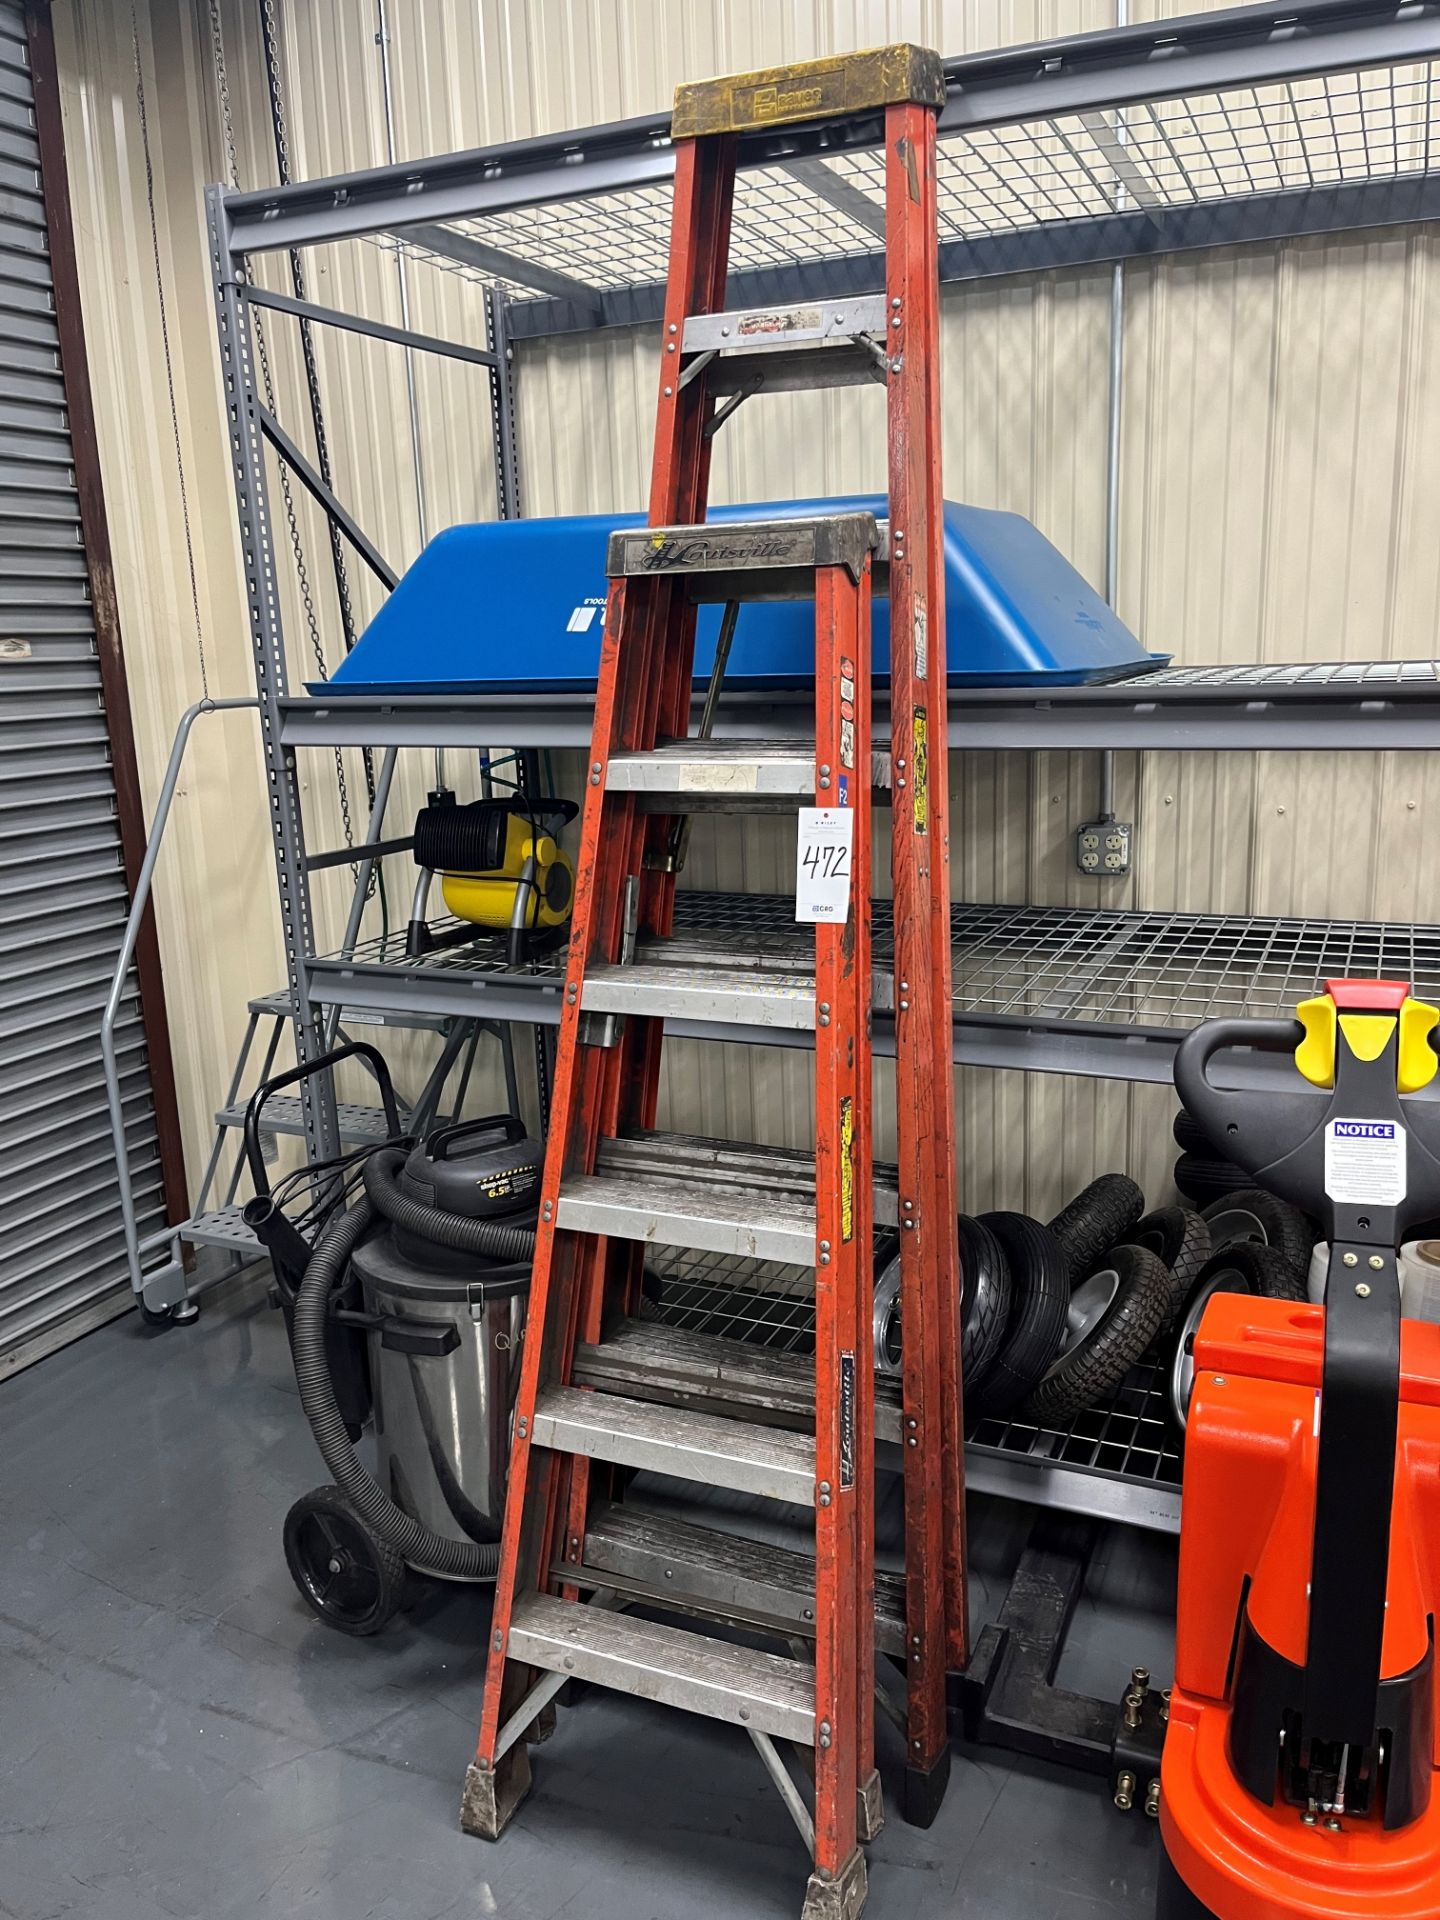 Lab ladders, shop vac, Stanley and portable heater